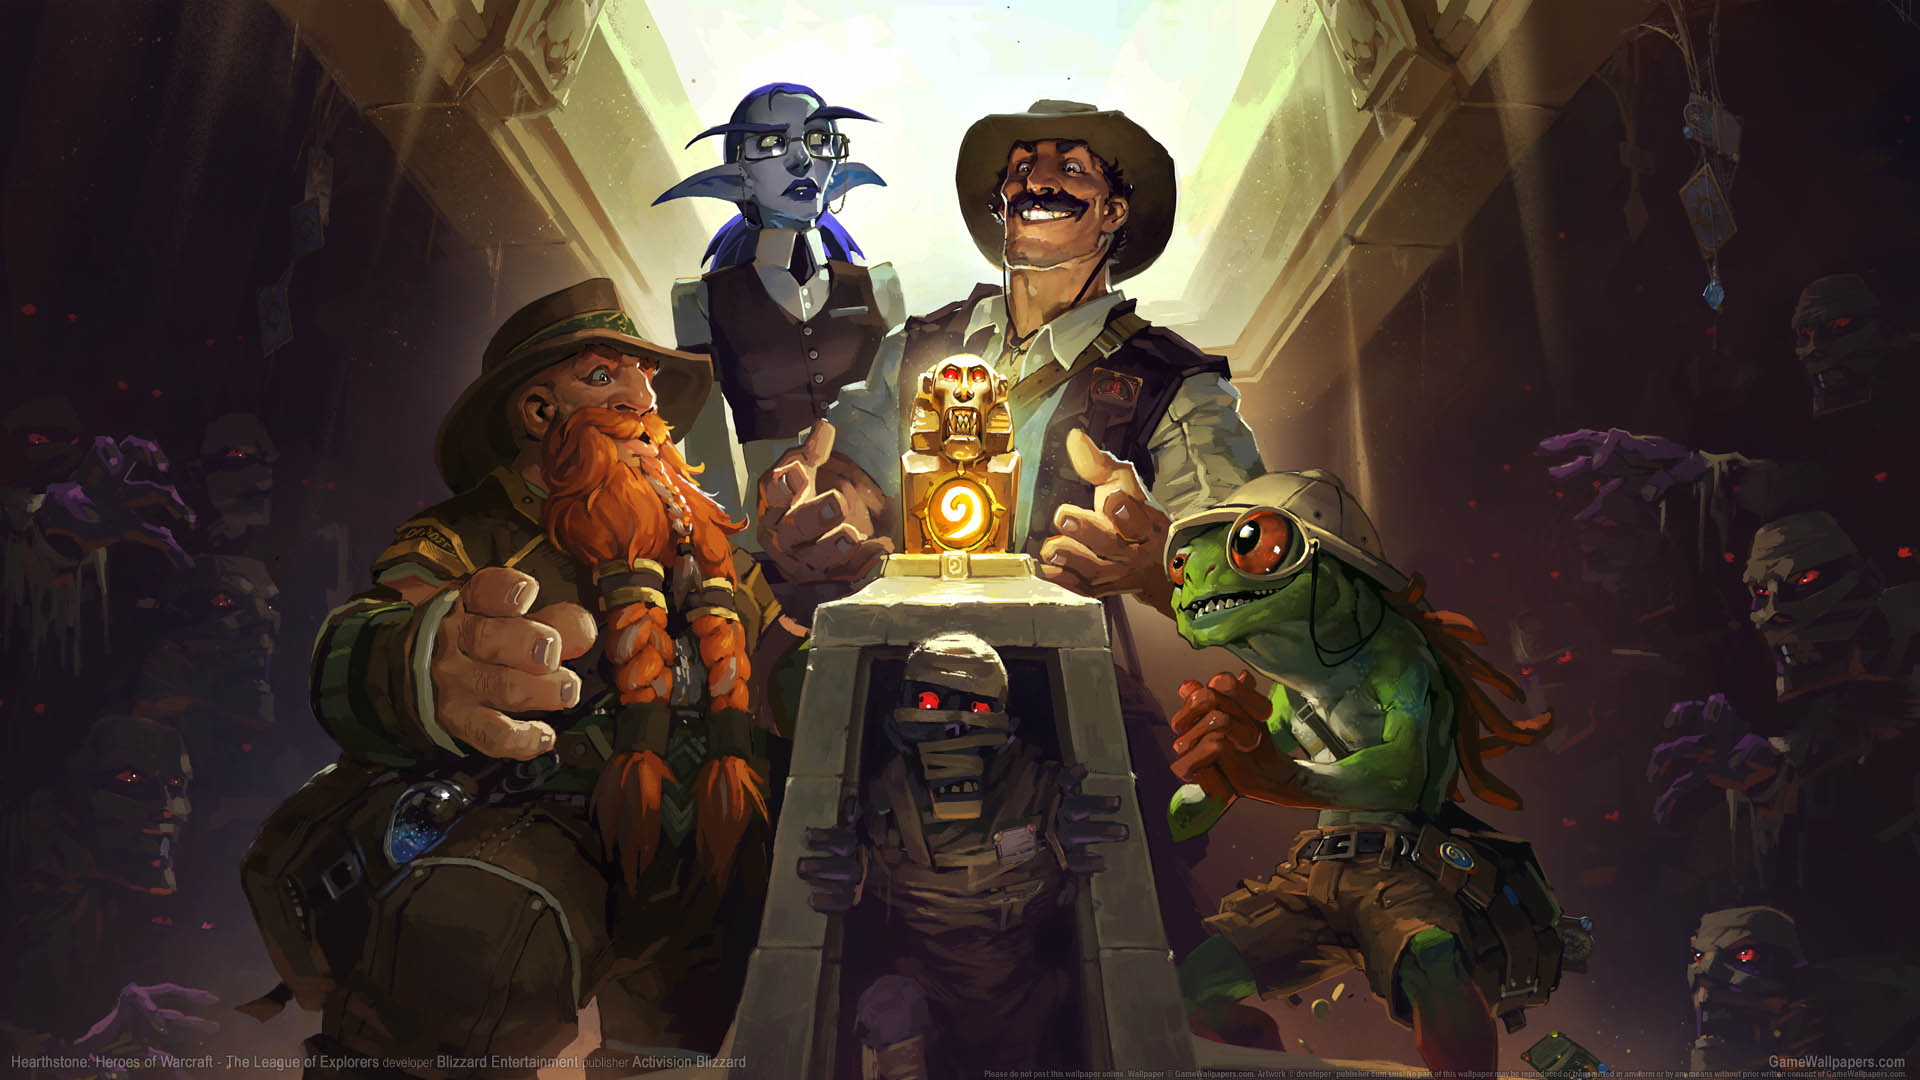 Hearthstone: Heroes of Warcraft - The League of Explorers achtergrond 01 1920x1080